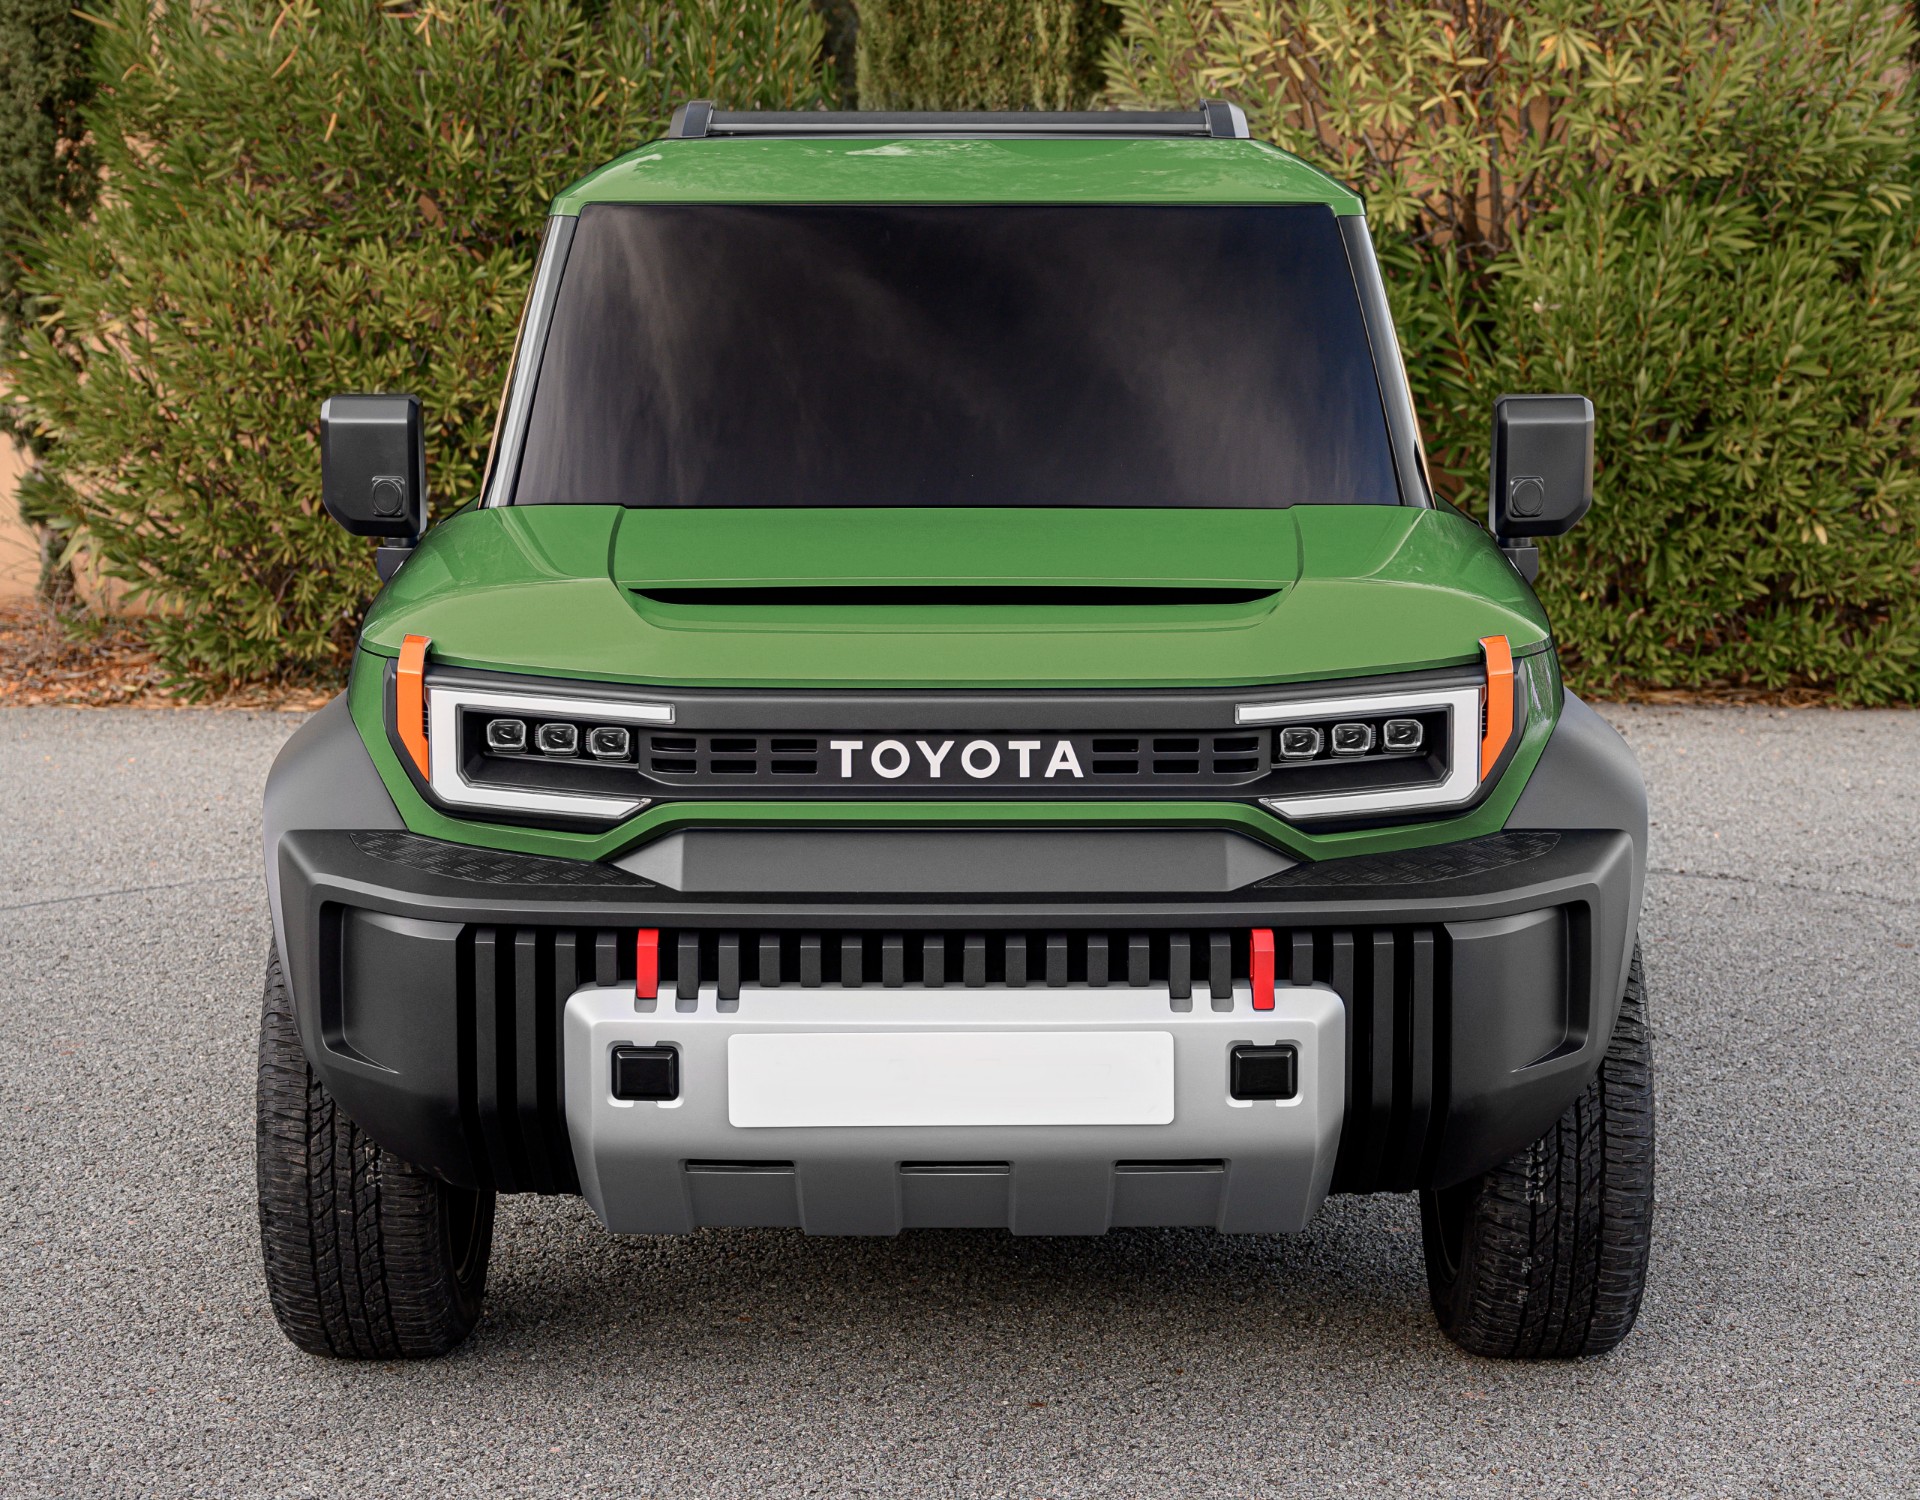 Toyota Compact Cruiser Pickup Rendering Green white rims Front - Auto Recent